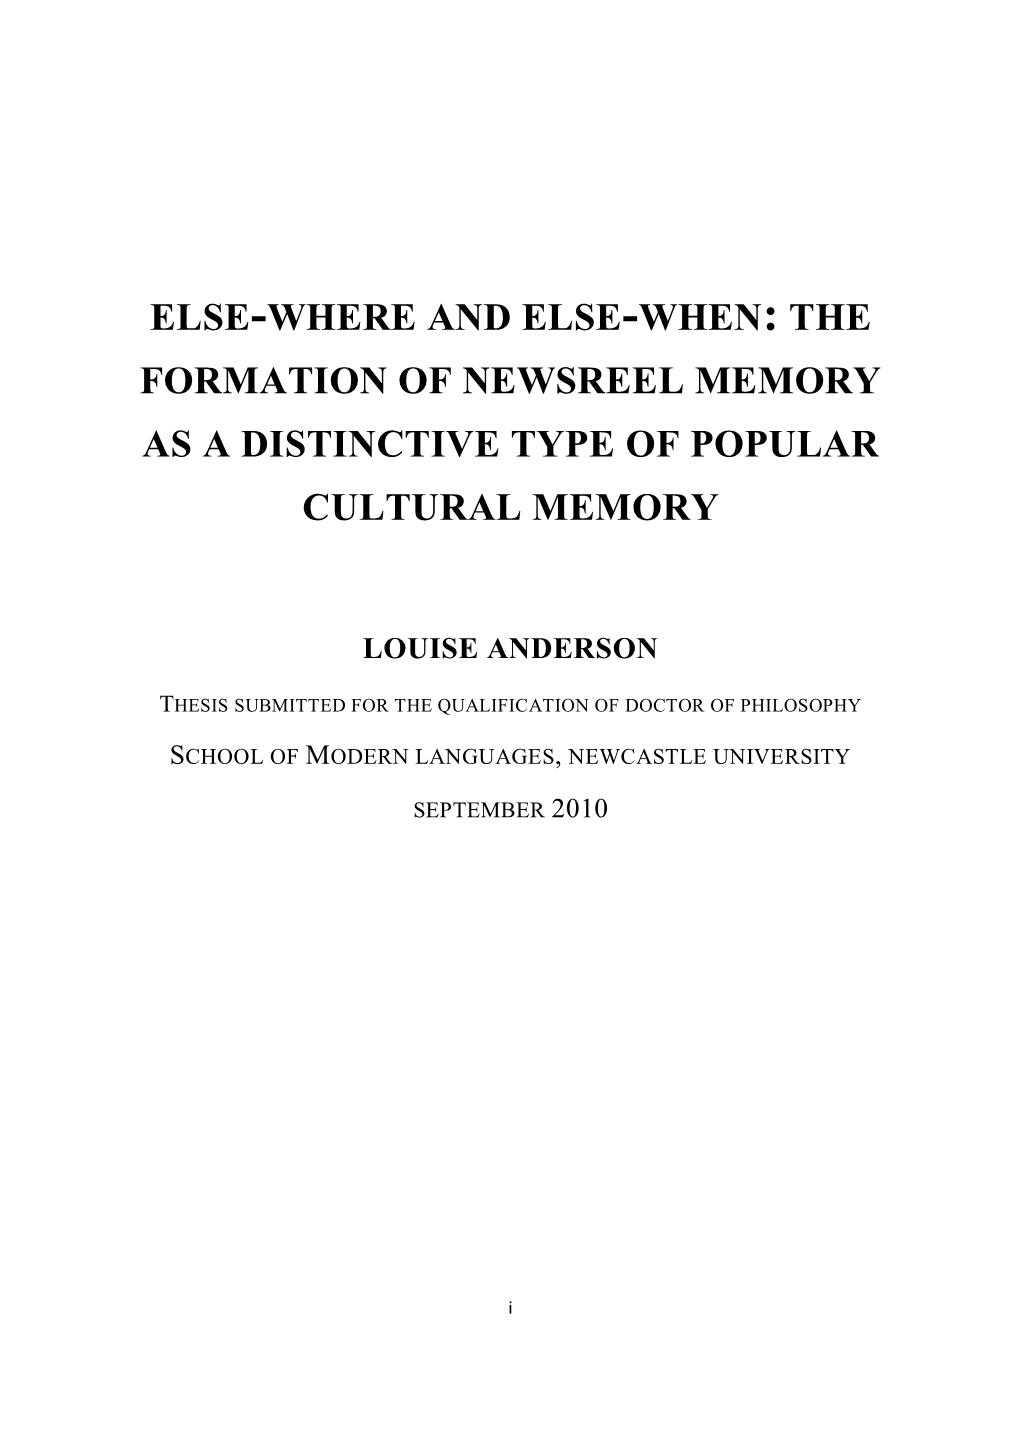 Else-Where and Else-When: the Formation of Newsreel Memory As a Distinctive Type of Popular Cultural Memory